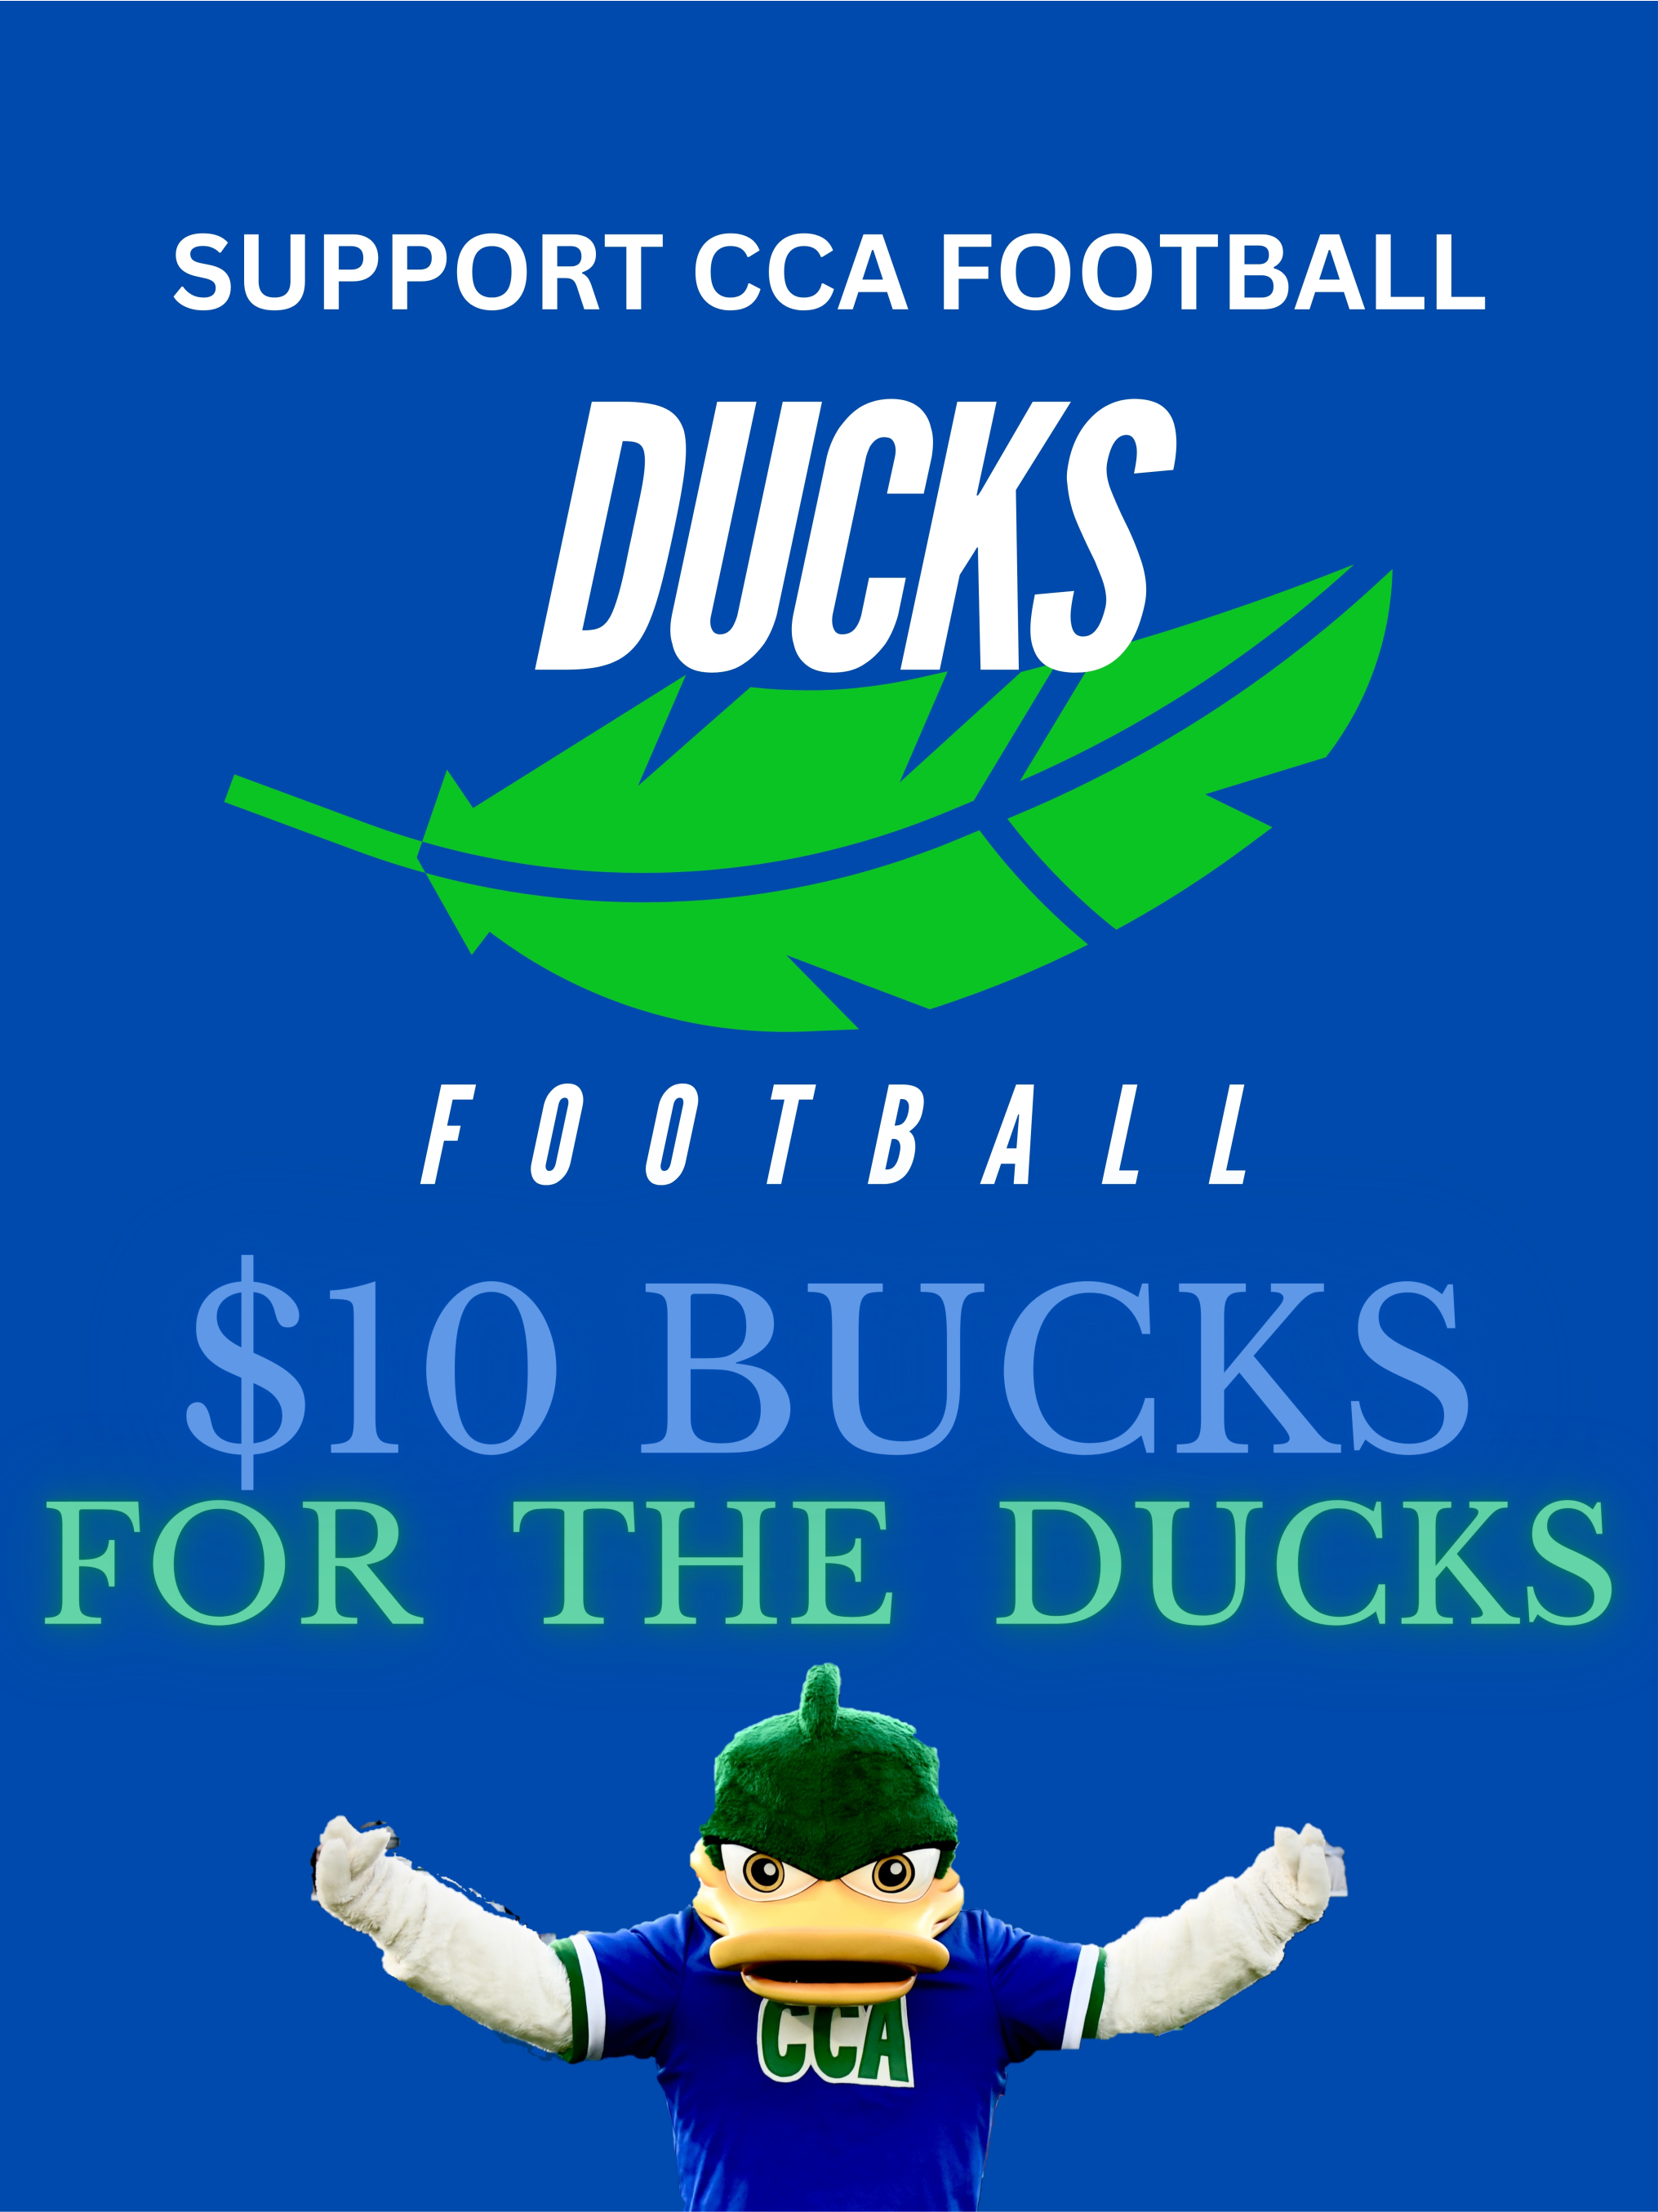 Bucks -Thank you for supporting CCA Football.